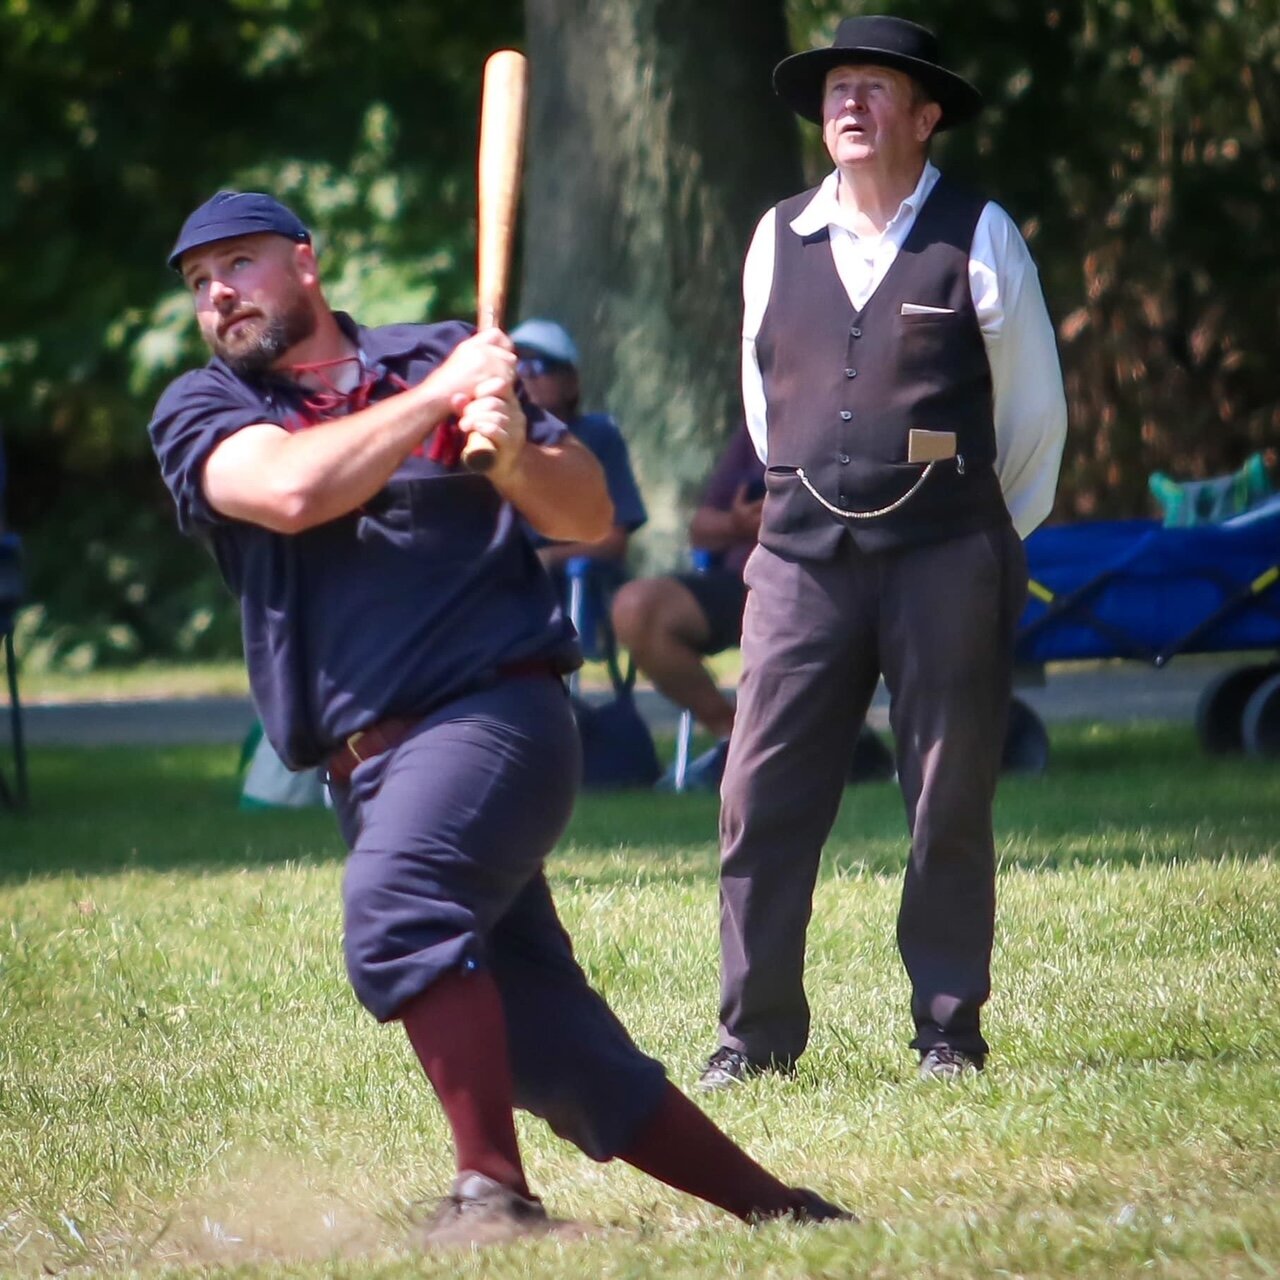 Devon “Beeds” Bedient swats the sphere into deep left field as the arbiter looks on in an 1860 rules match at the Doc Adams Old Time Base Ball Festival in Bethpage.